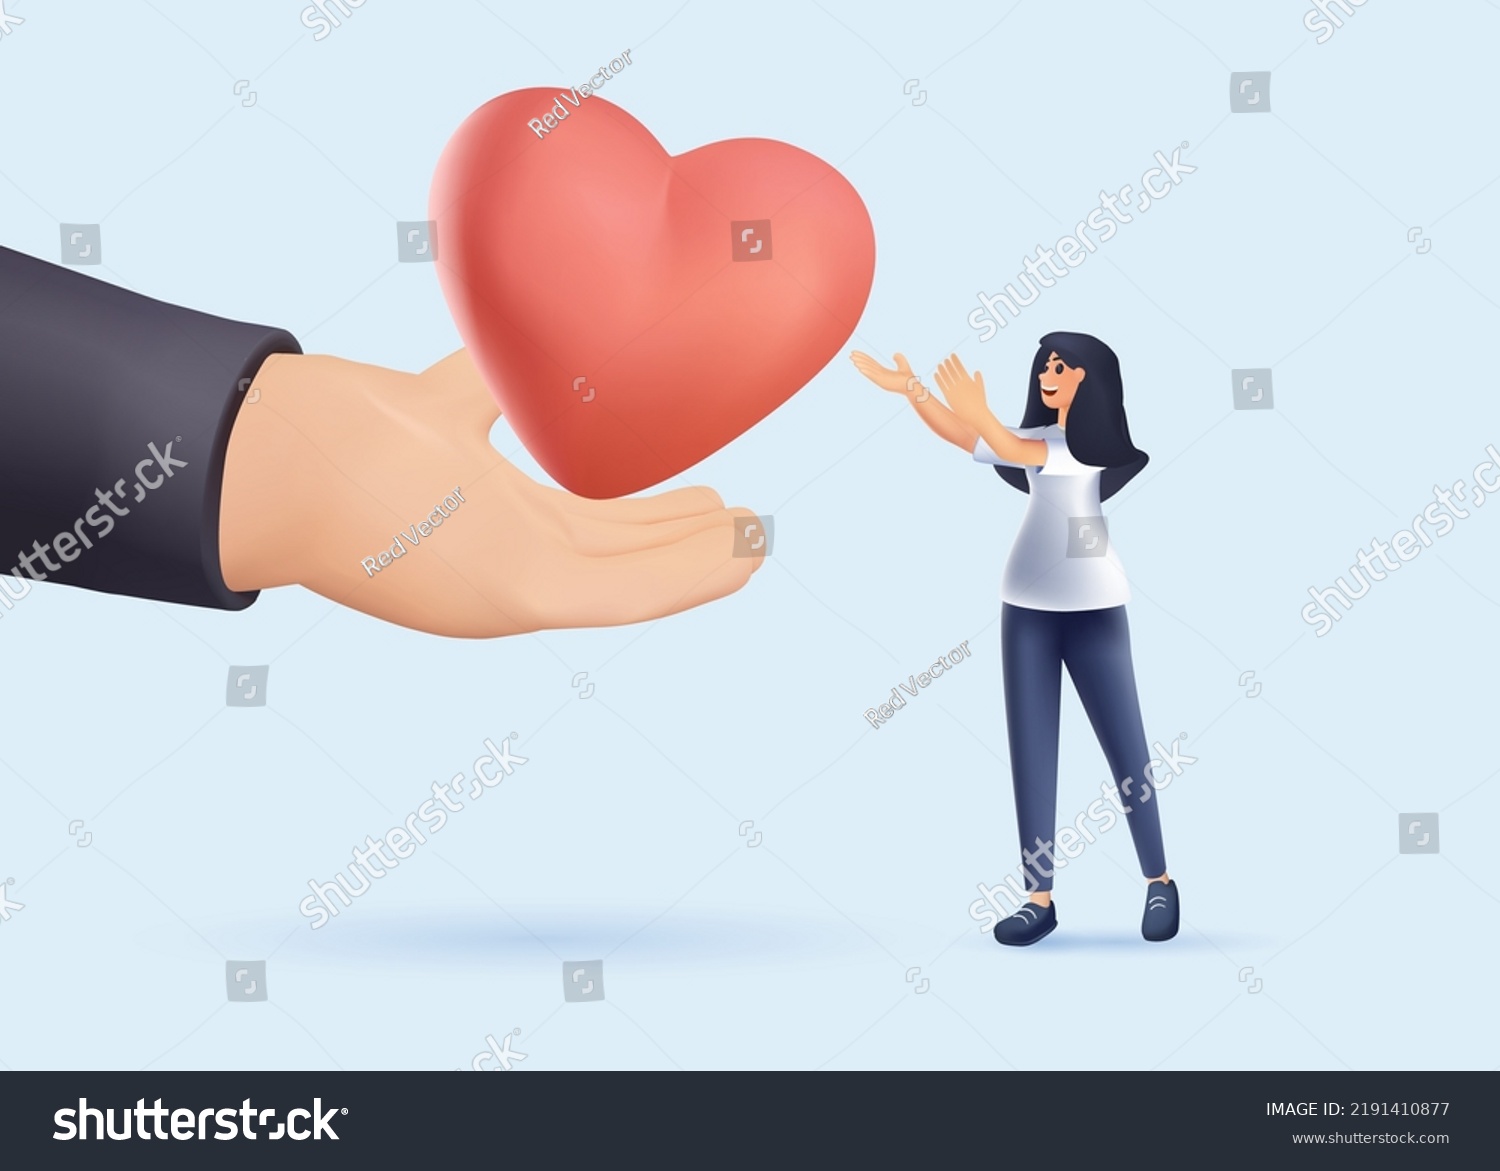 SVG of 3D Hand with big red heart and woman. Support and kindness in community. Self care, psychology help, treatment, rehab. Female volunteer share empathy and hope with needy. Help life. 3D vector render svg